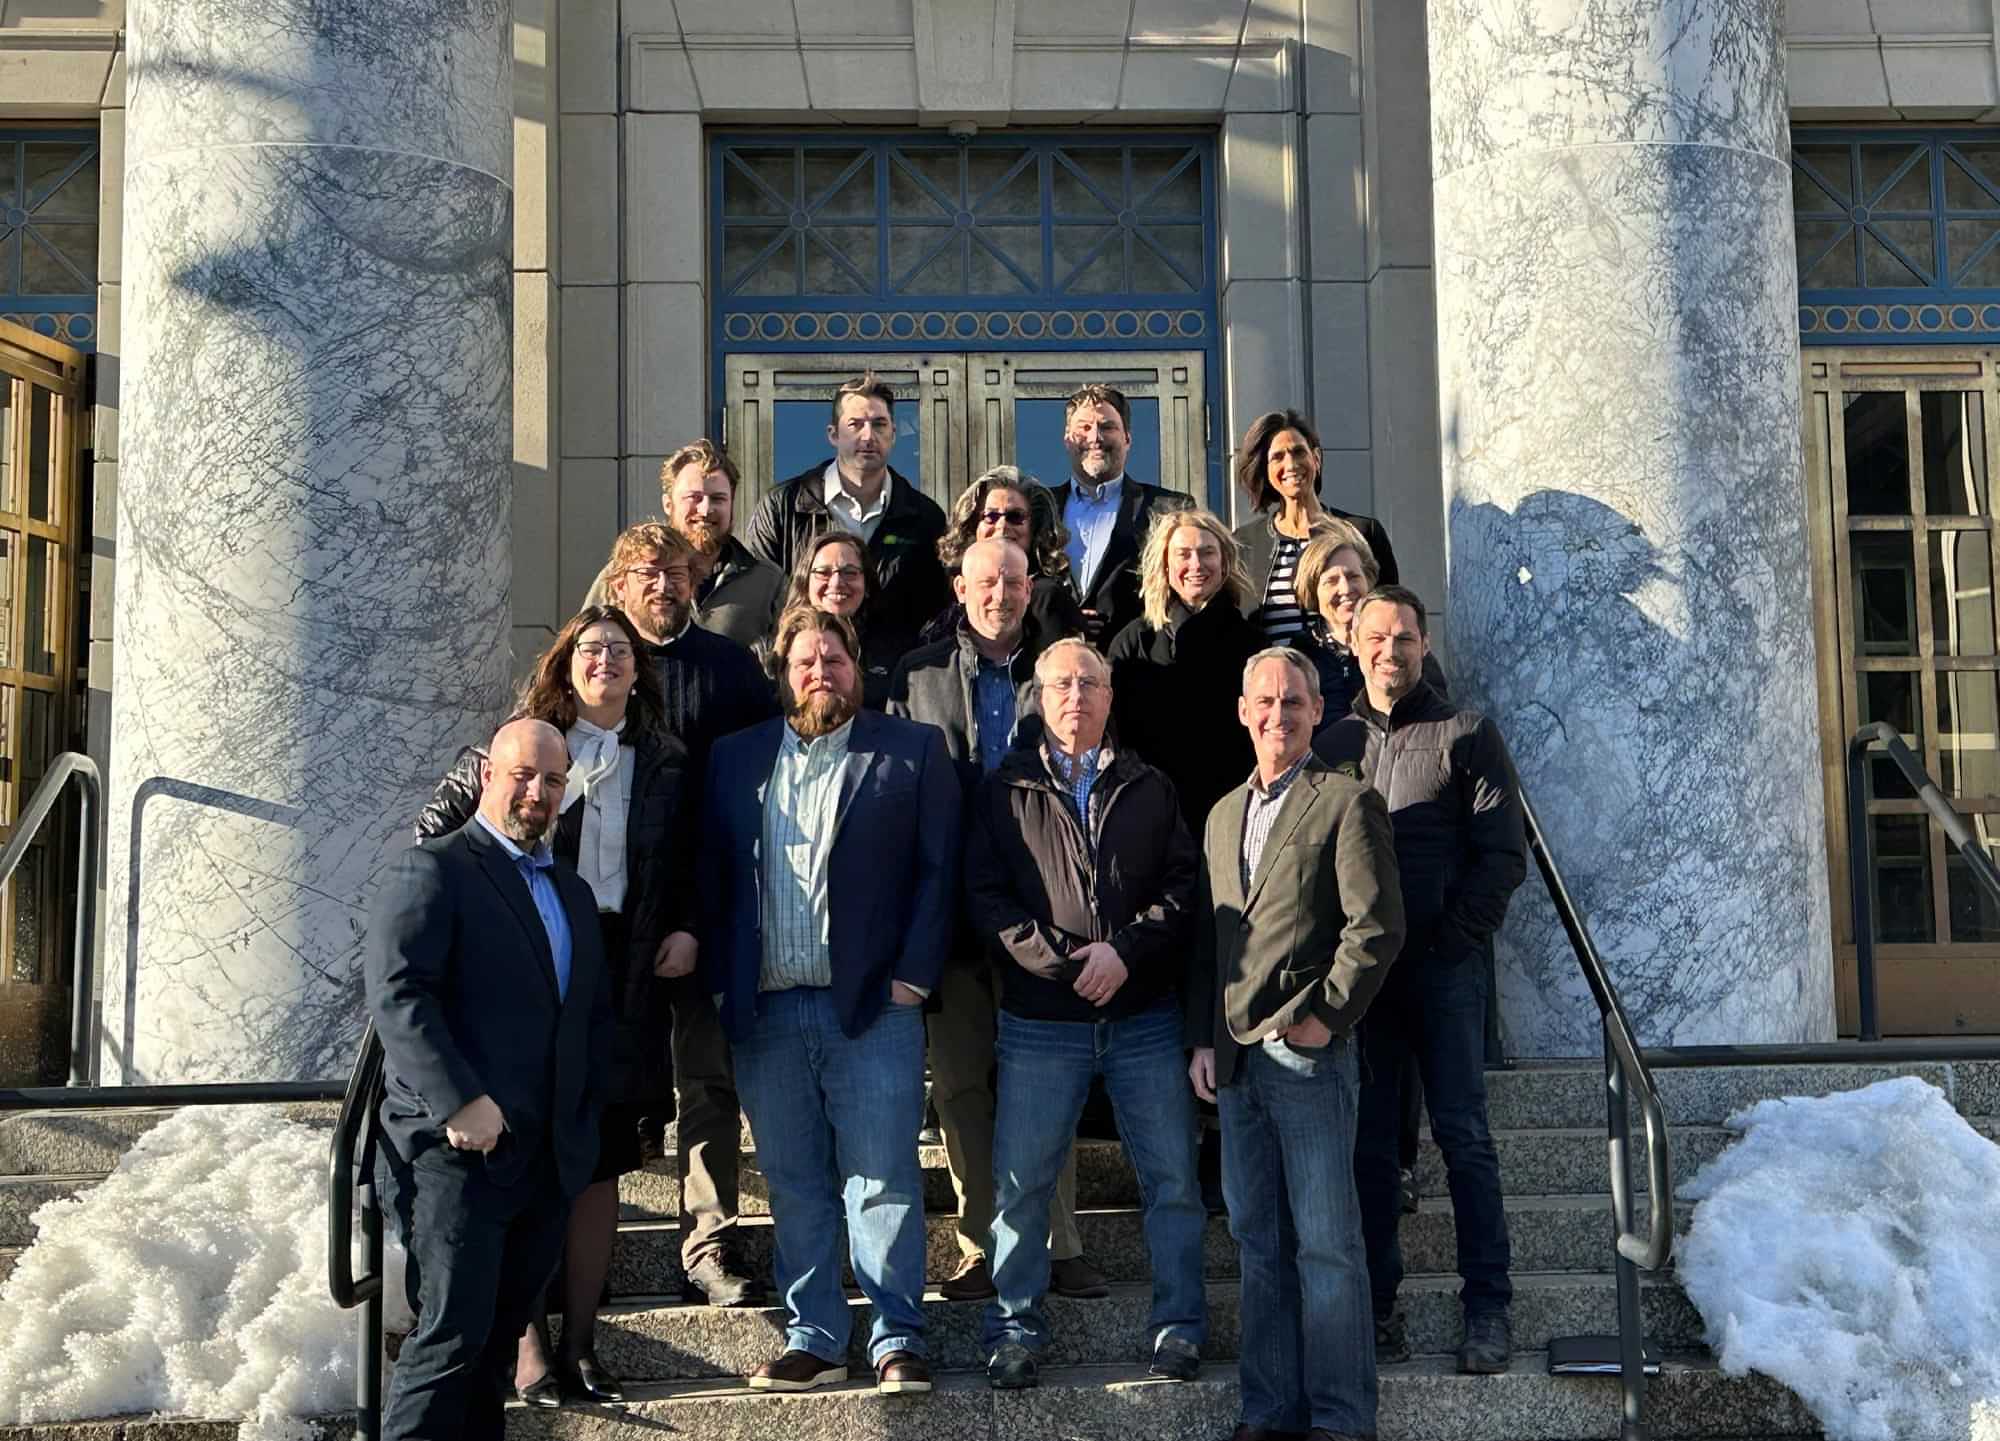 attendees of the 2023 AGC Alaska Legislative Fly-In event take a group photo on the entrance steps of a large pillared building